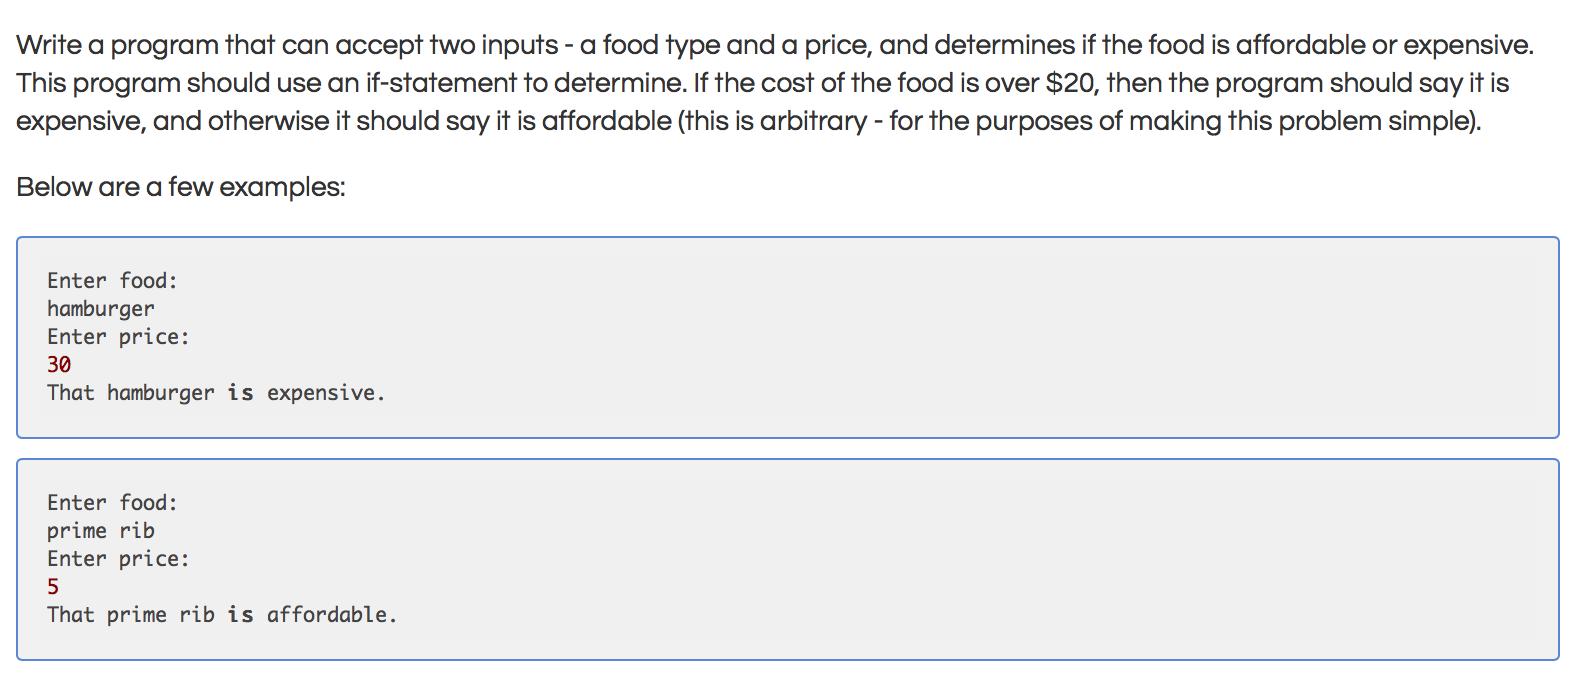 Write a program that can accept two inputs - a food type and a price, and determines if the food is